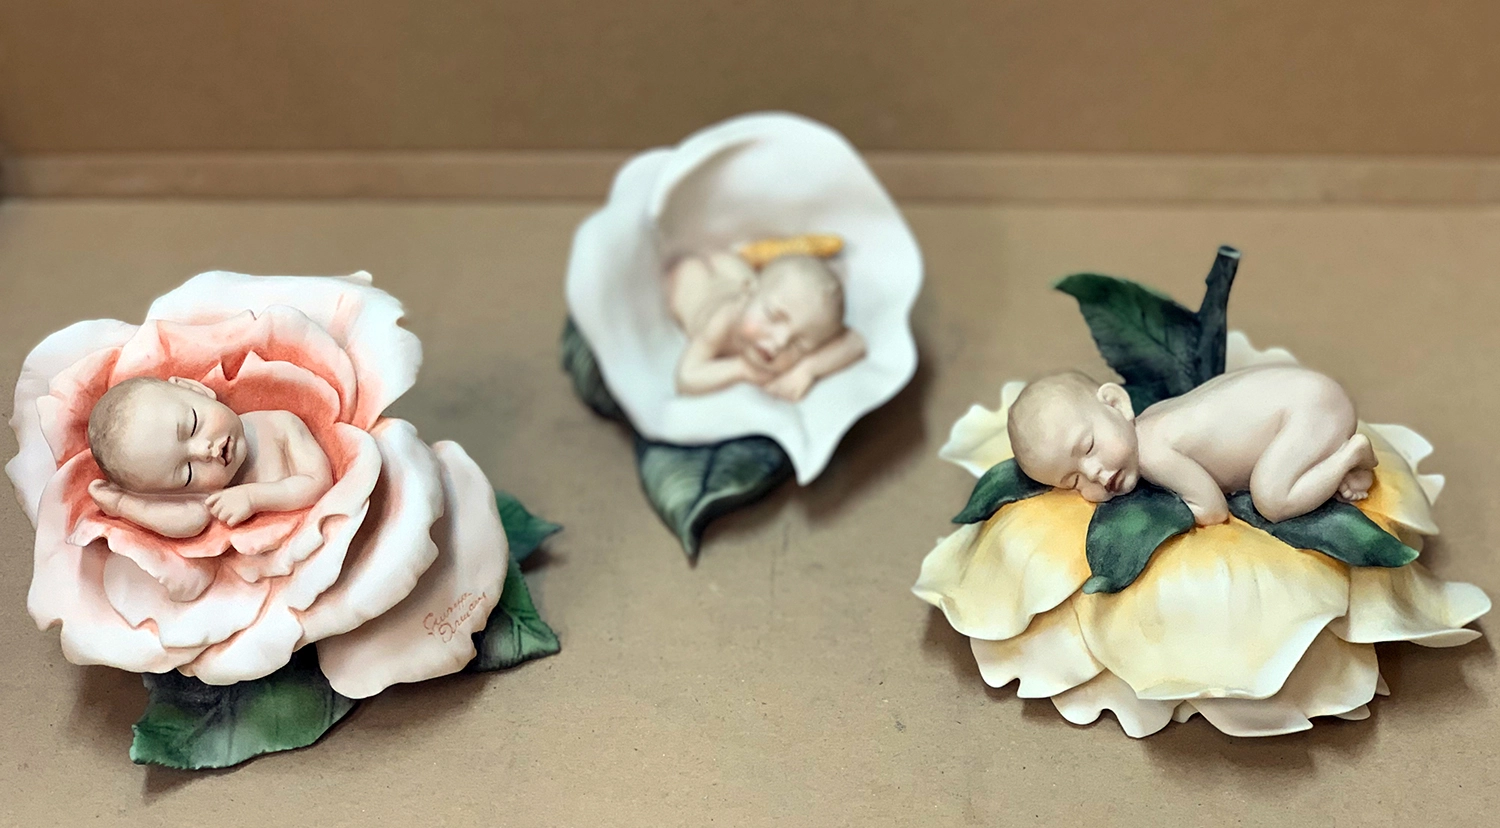 Giuseppe Armani Baby and Flower Set Sculpture